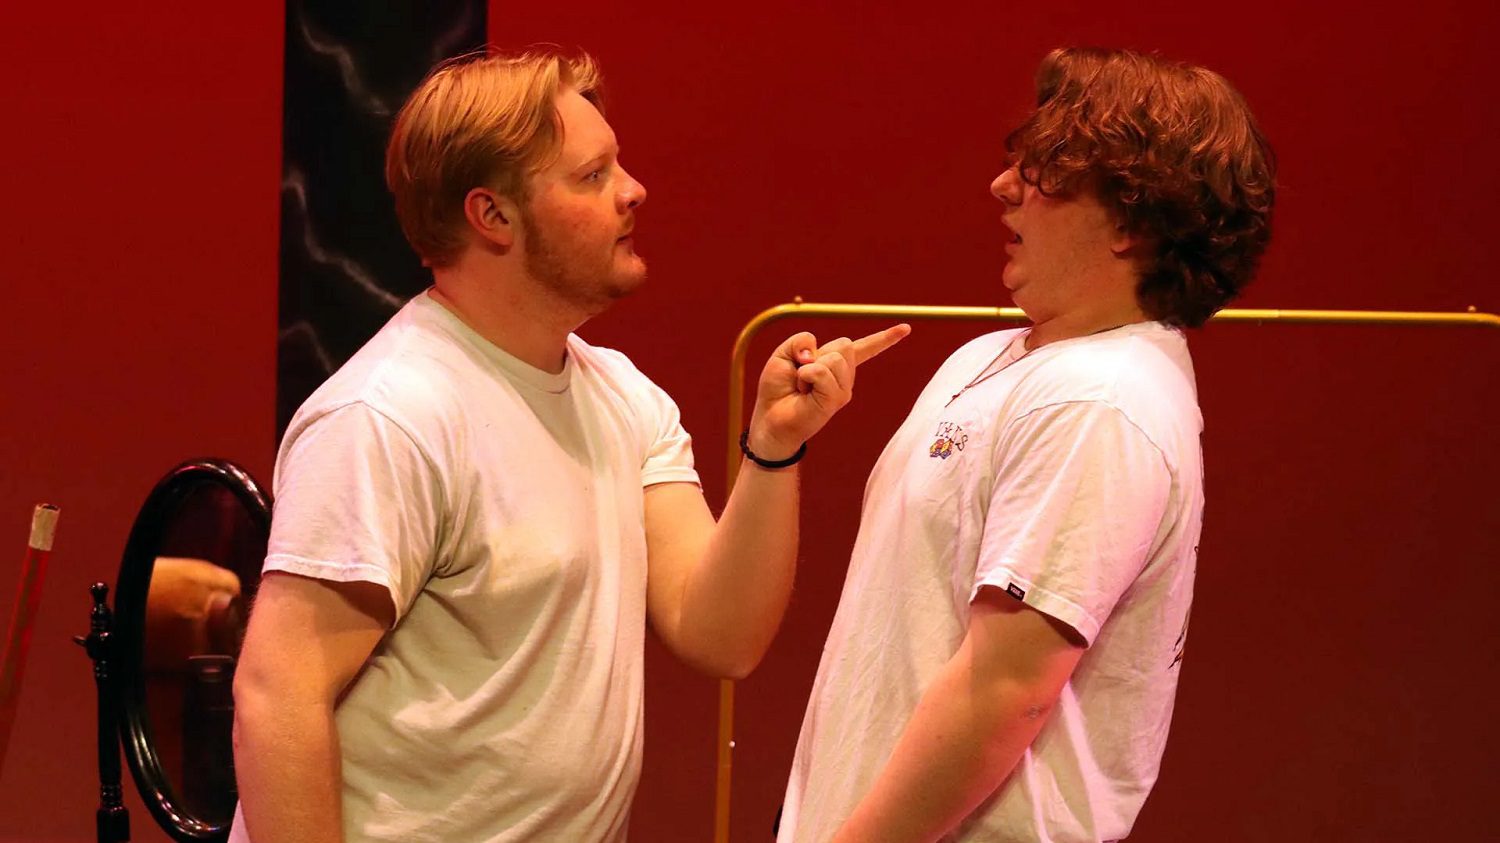 two white male actors perform on stage